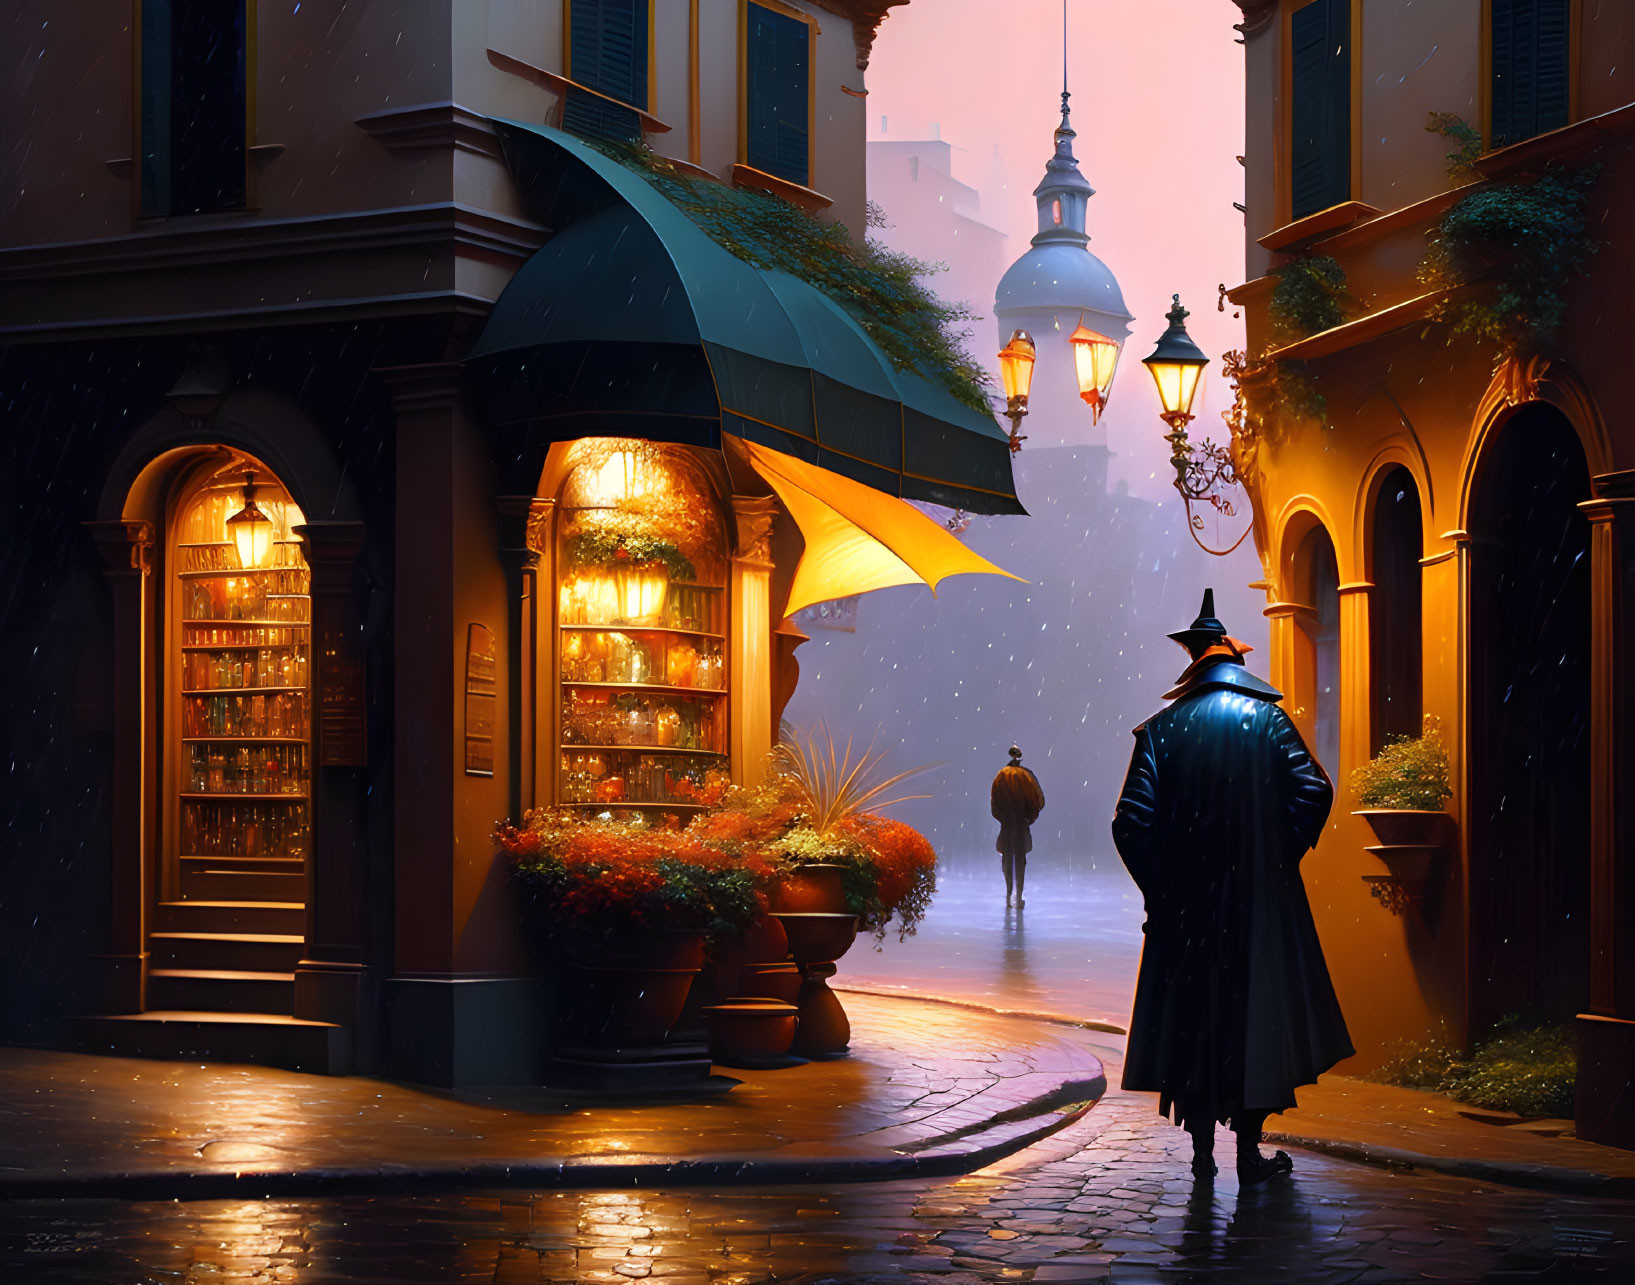 Person in trench coat and hat walking on rainy, lamp-lit cobblestone street past bookshop